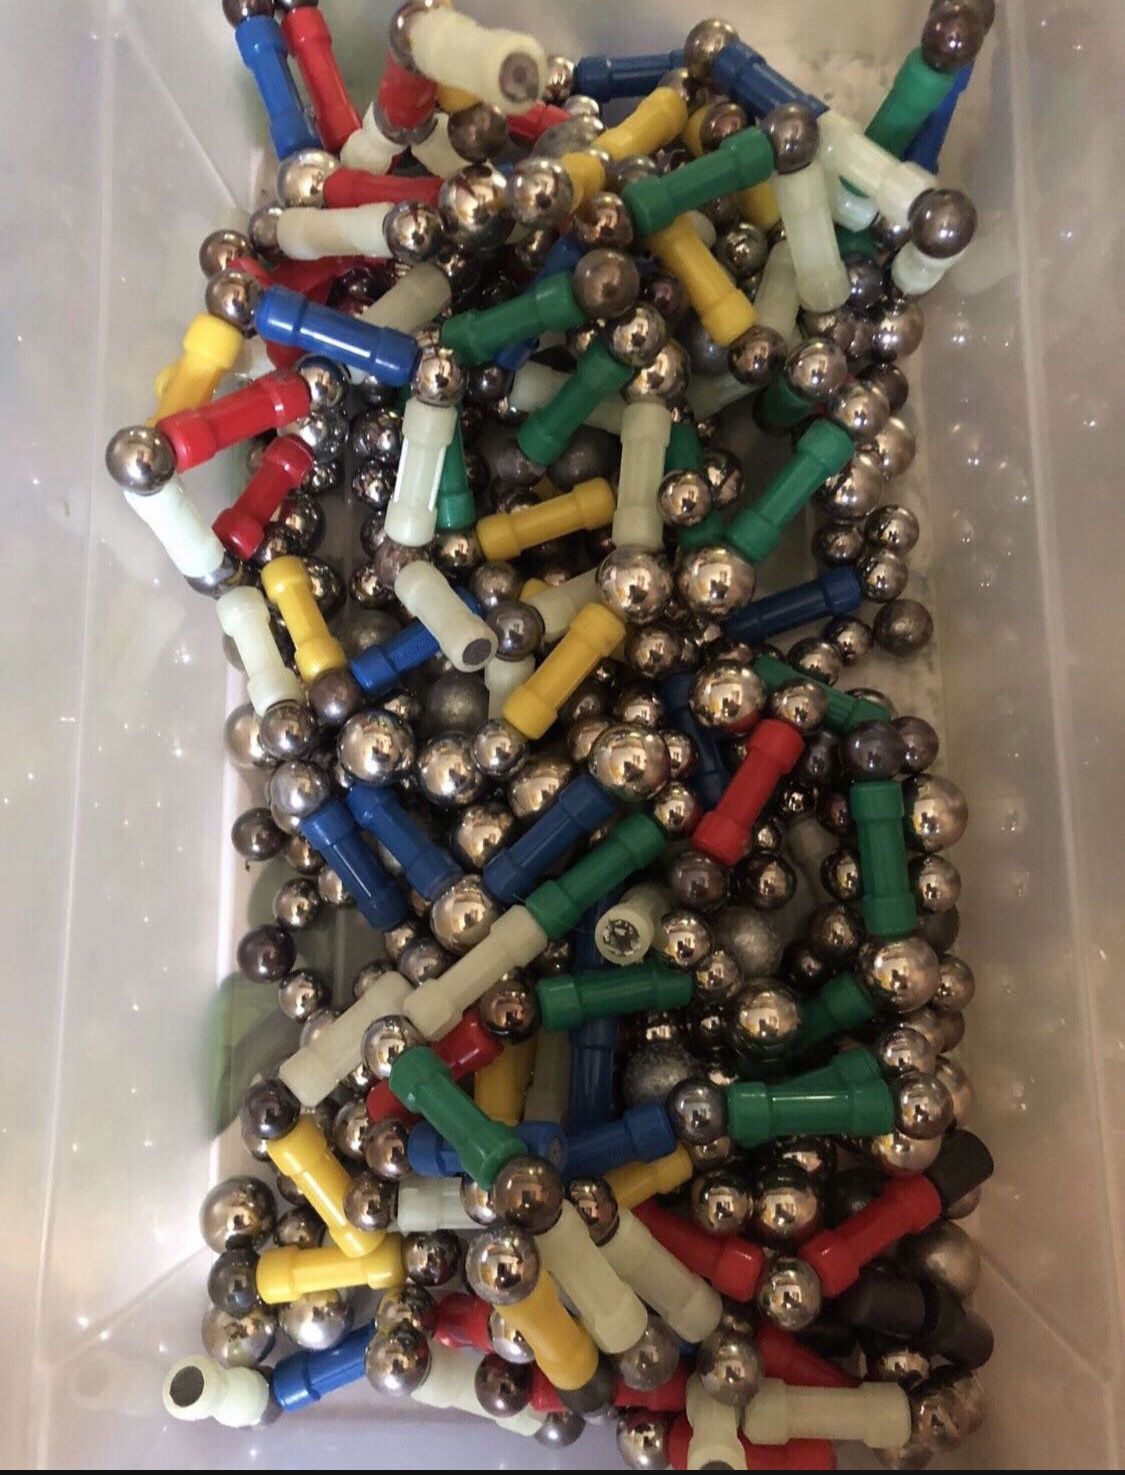 Large Lot Of Magnetic, Glow In The Dark Building Sticks And Marbles!